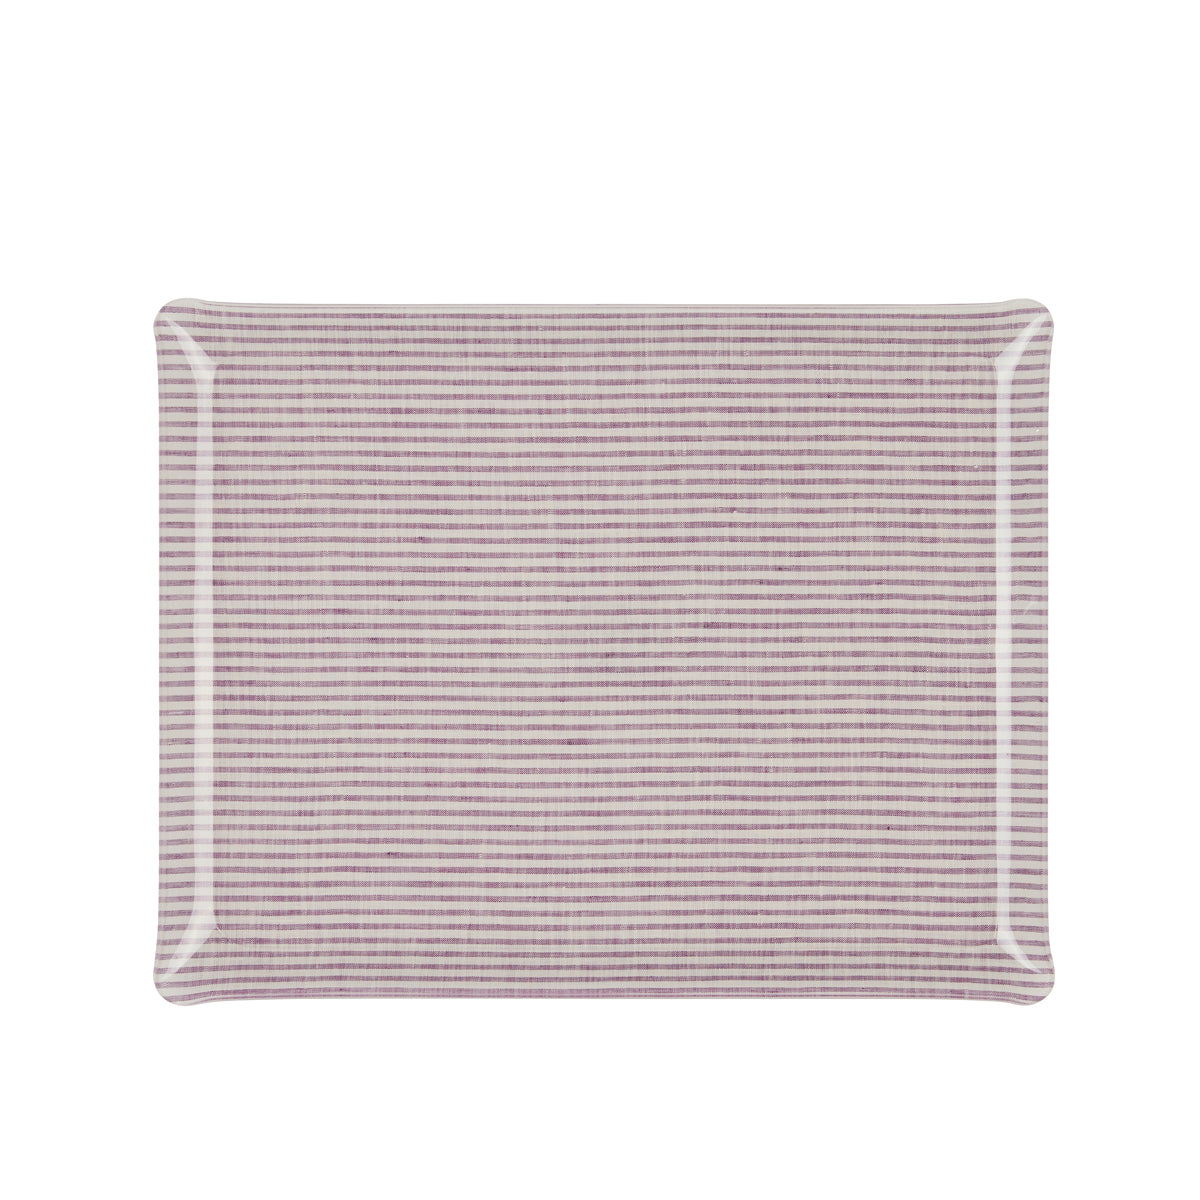 Nina Campbell Fabric Tray Large - Stripe Amethyst and White